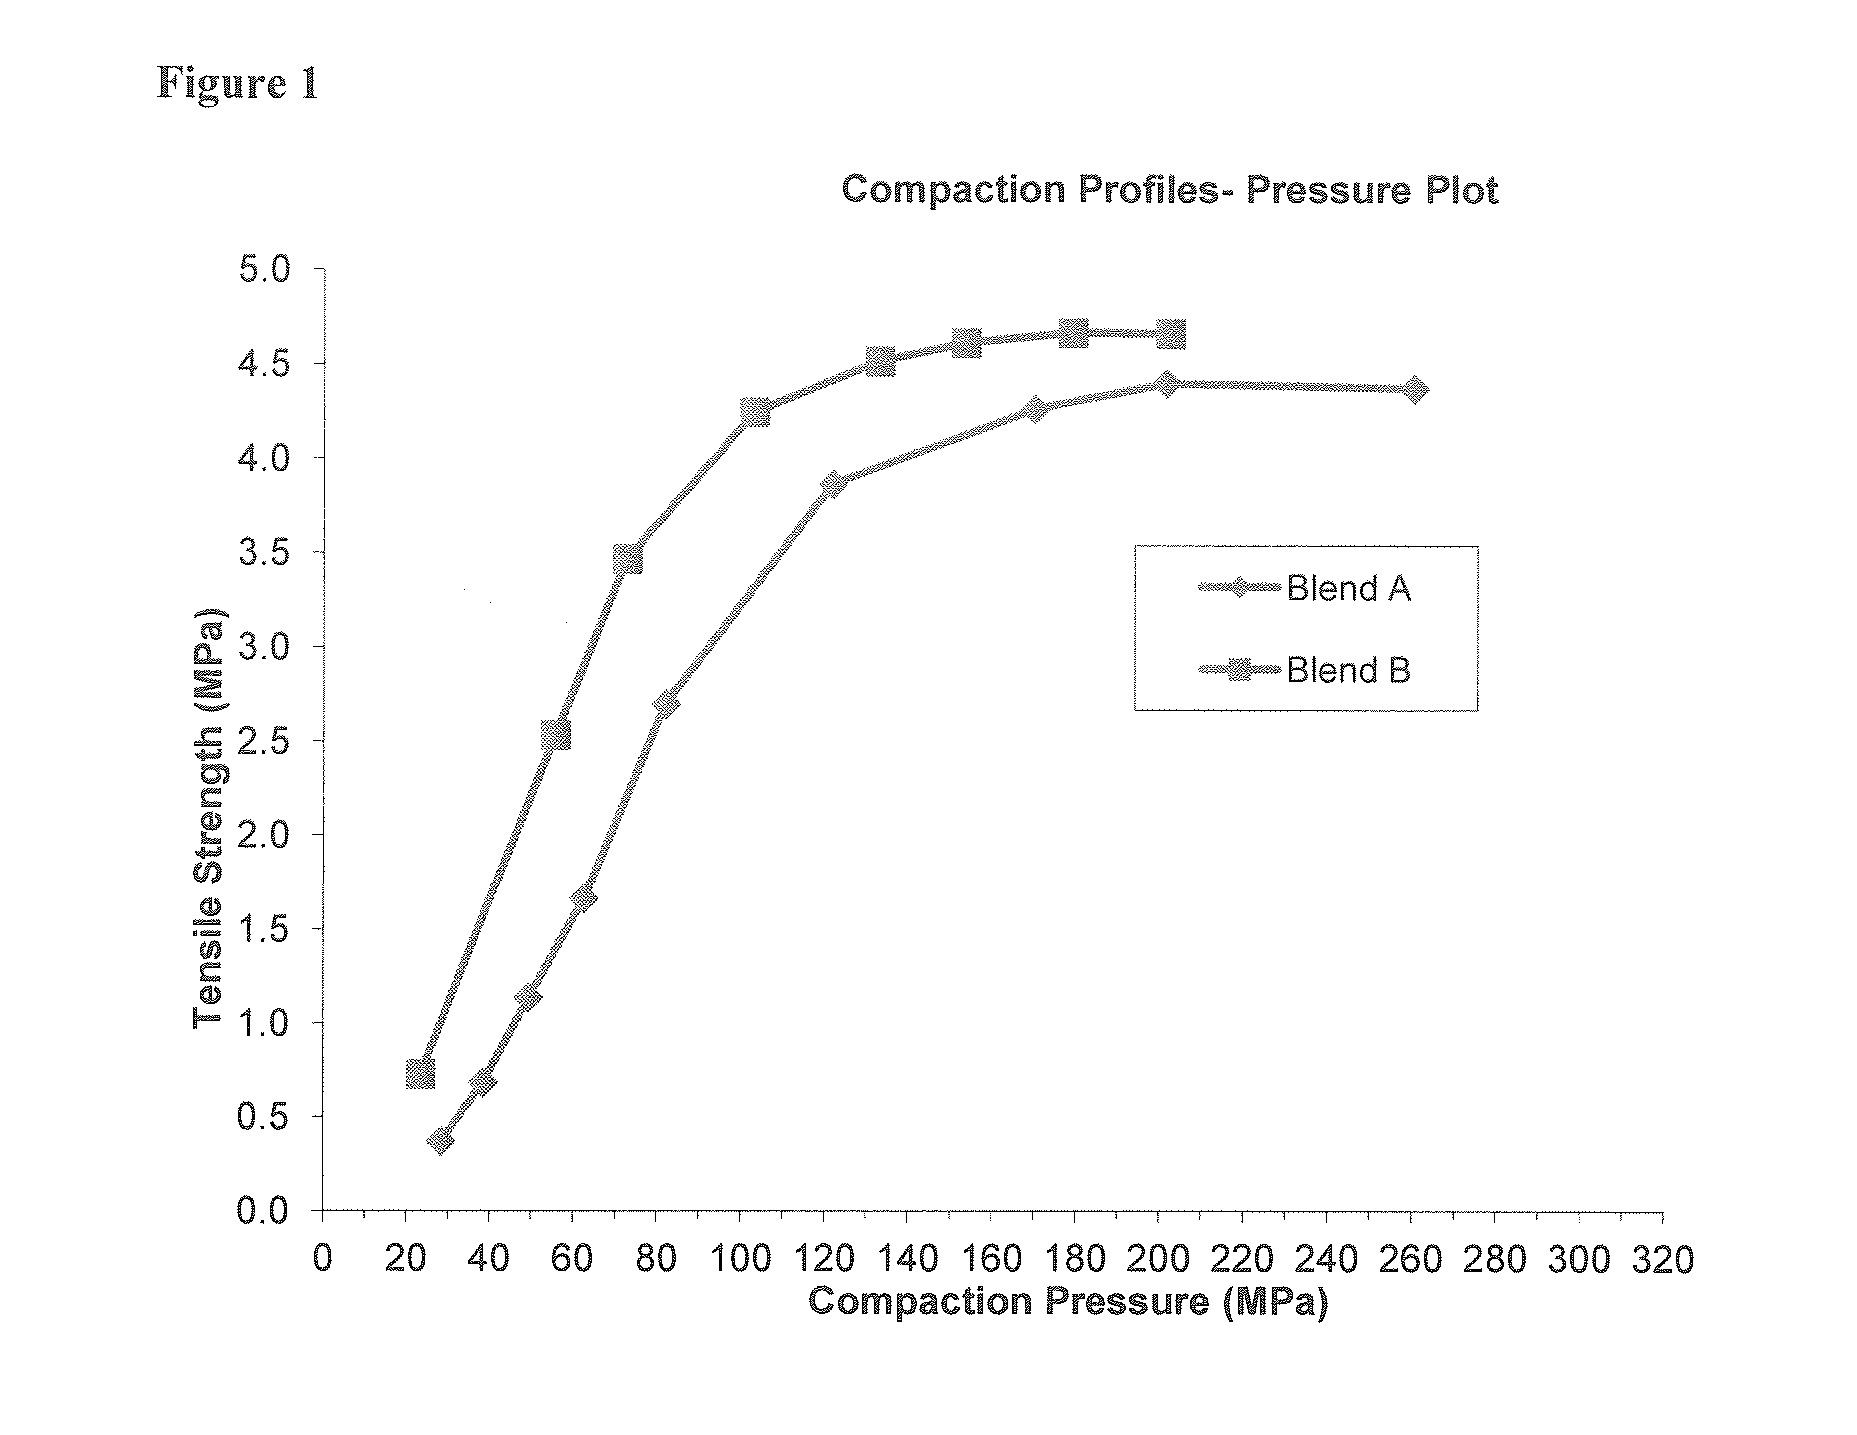 Pharmaceutical compositions containing dimethyl fumarate